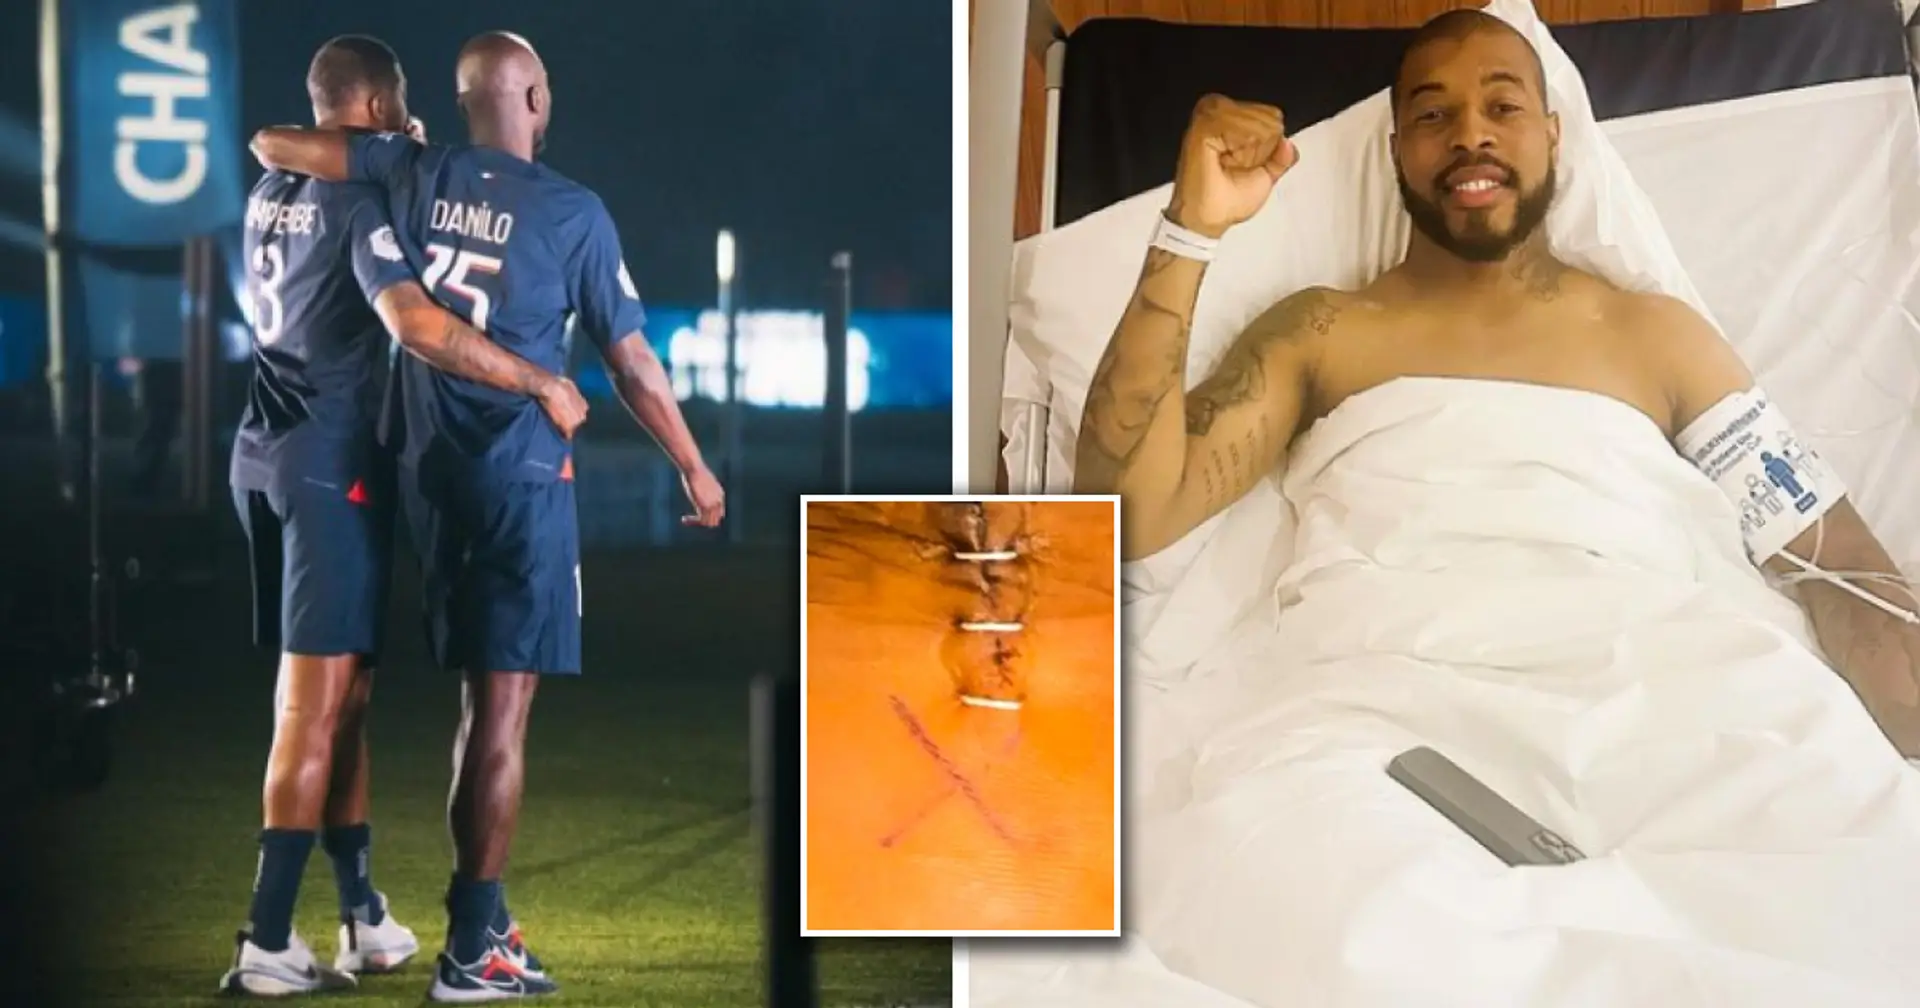 Presnel Kimpembe reveals extent of his Achilles tendon injury in startling image